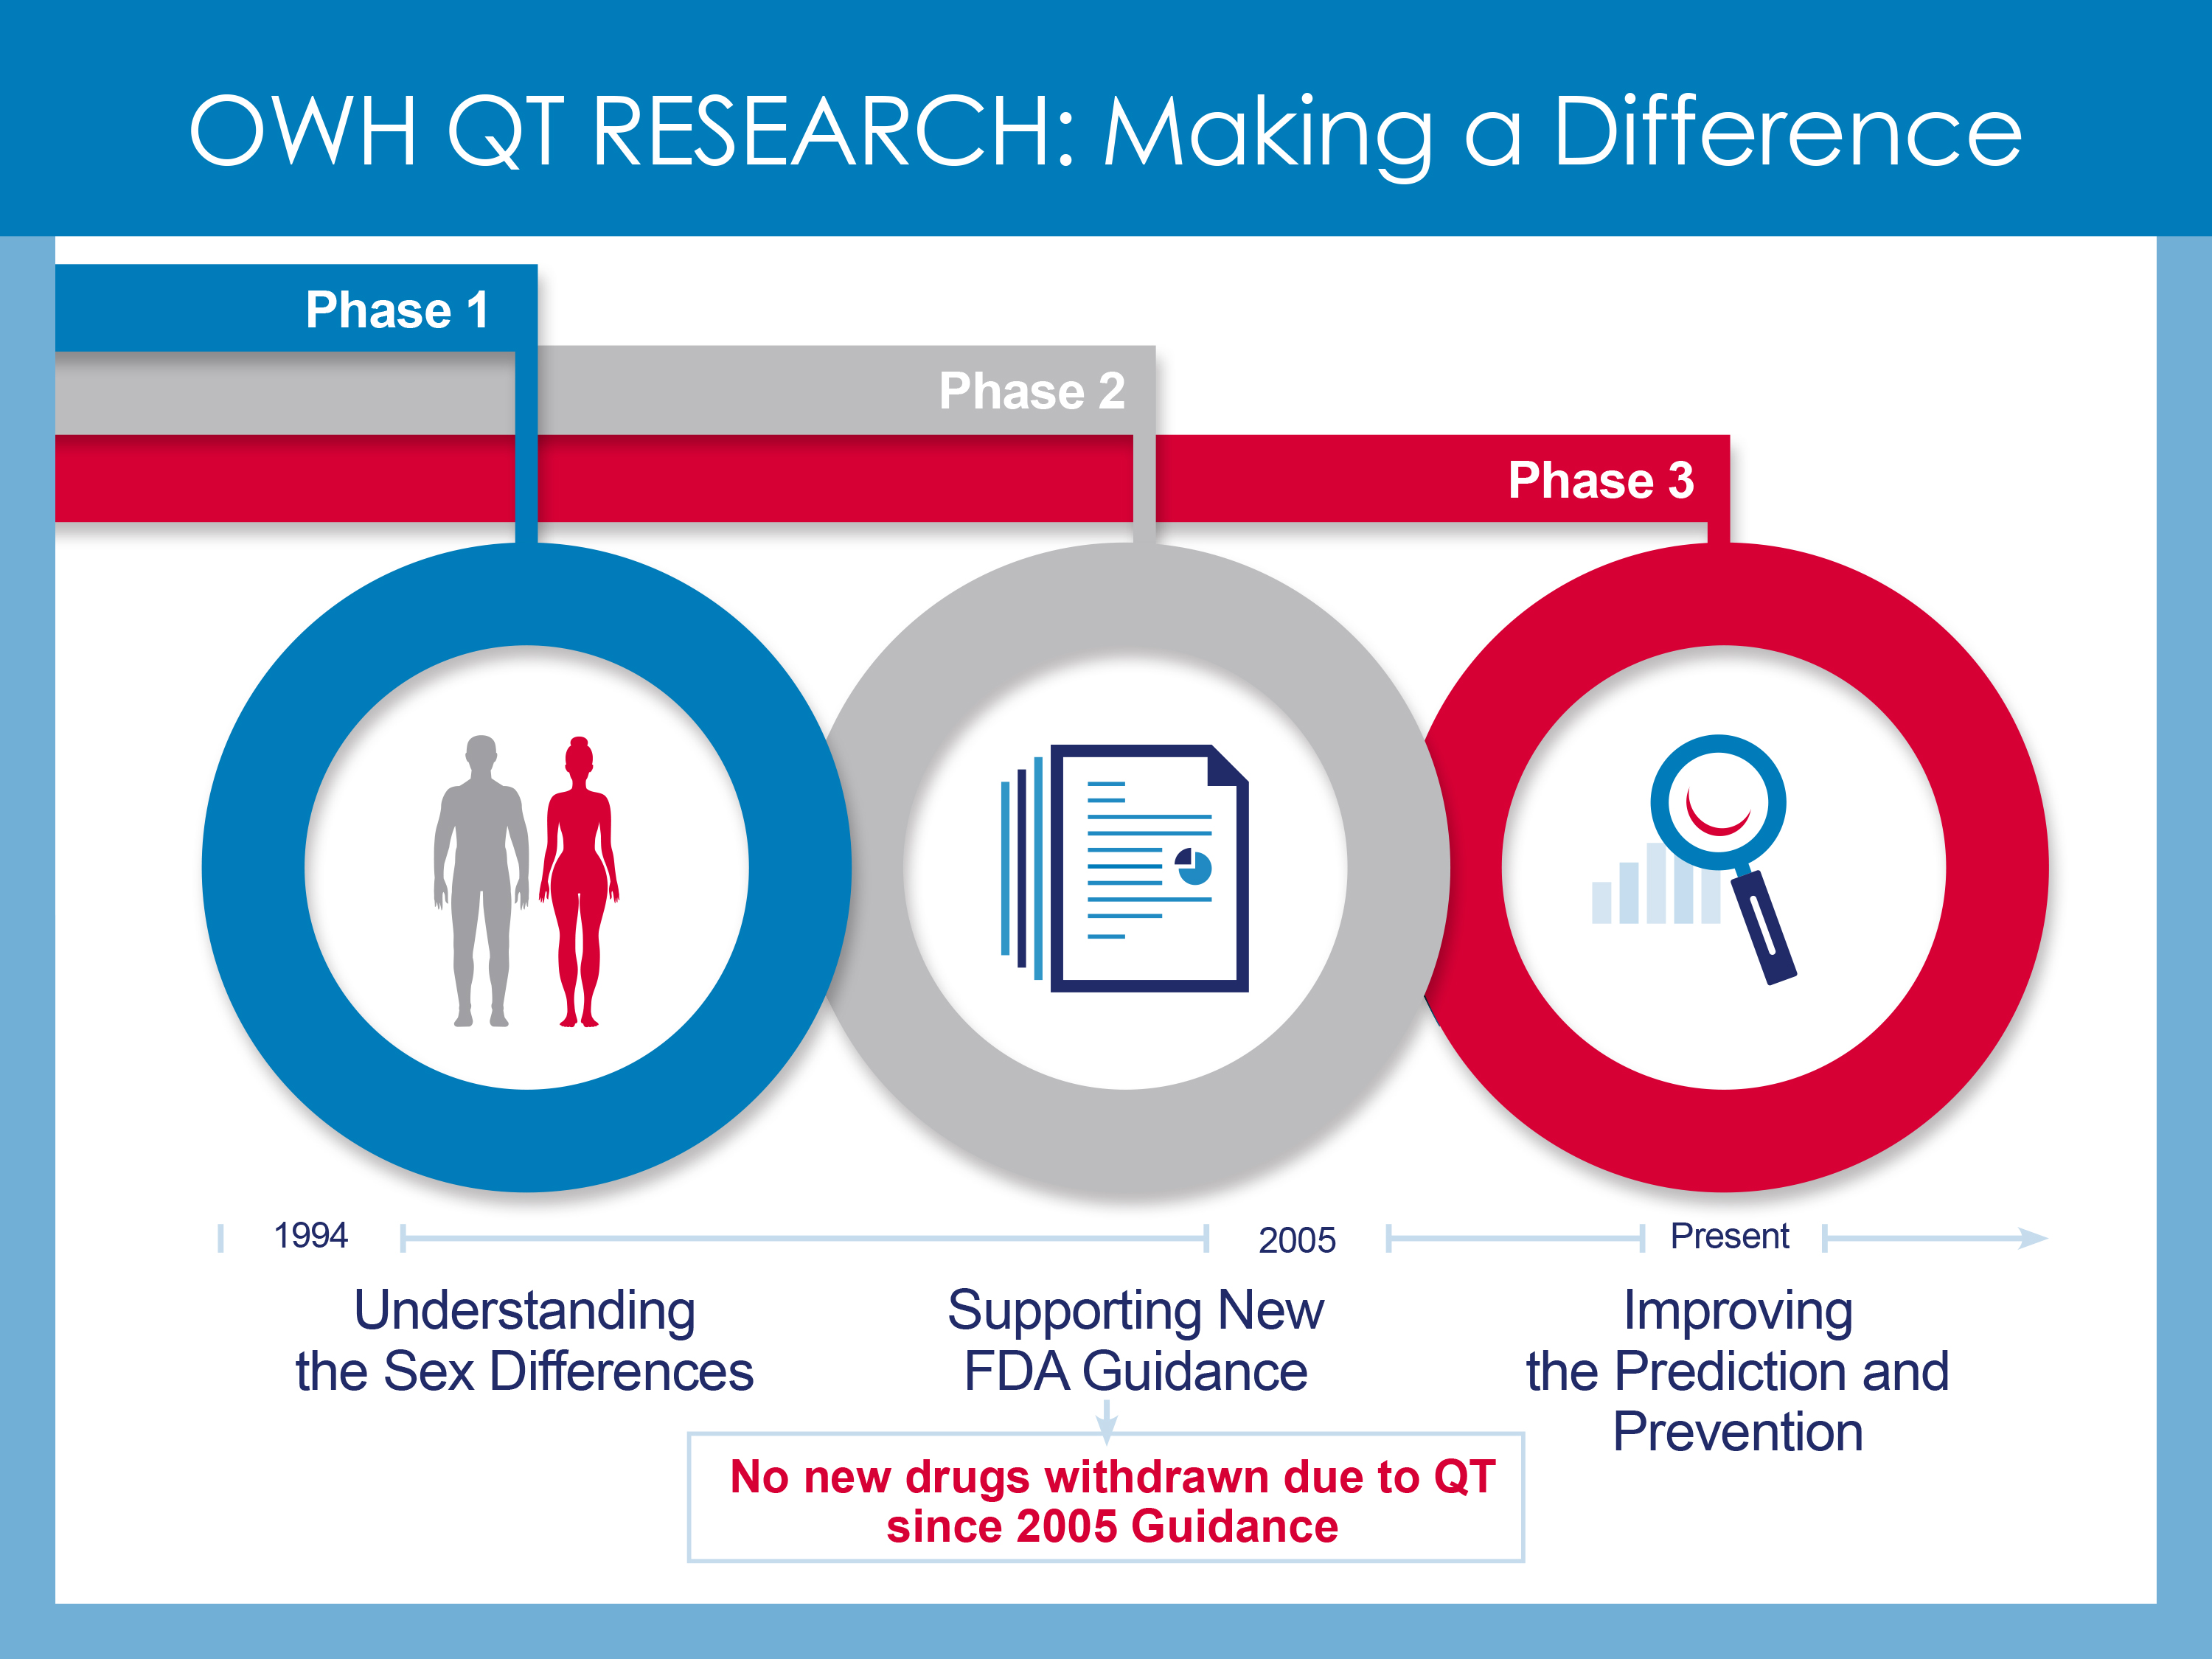 OWH QT Research: Making a Difference